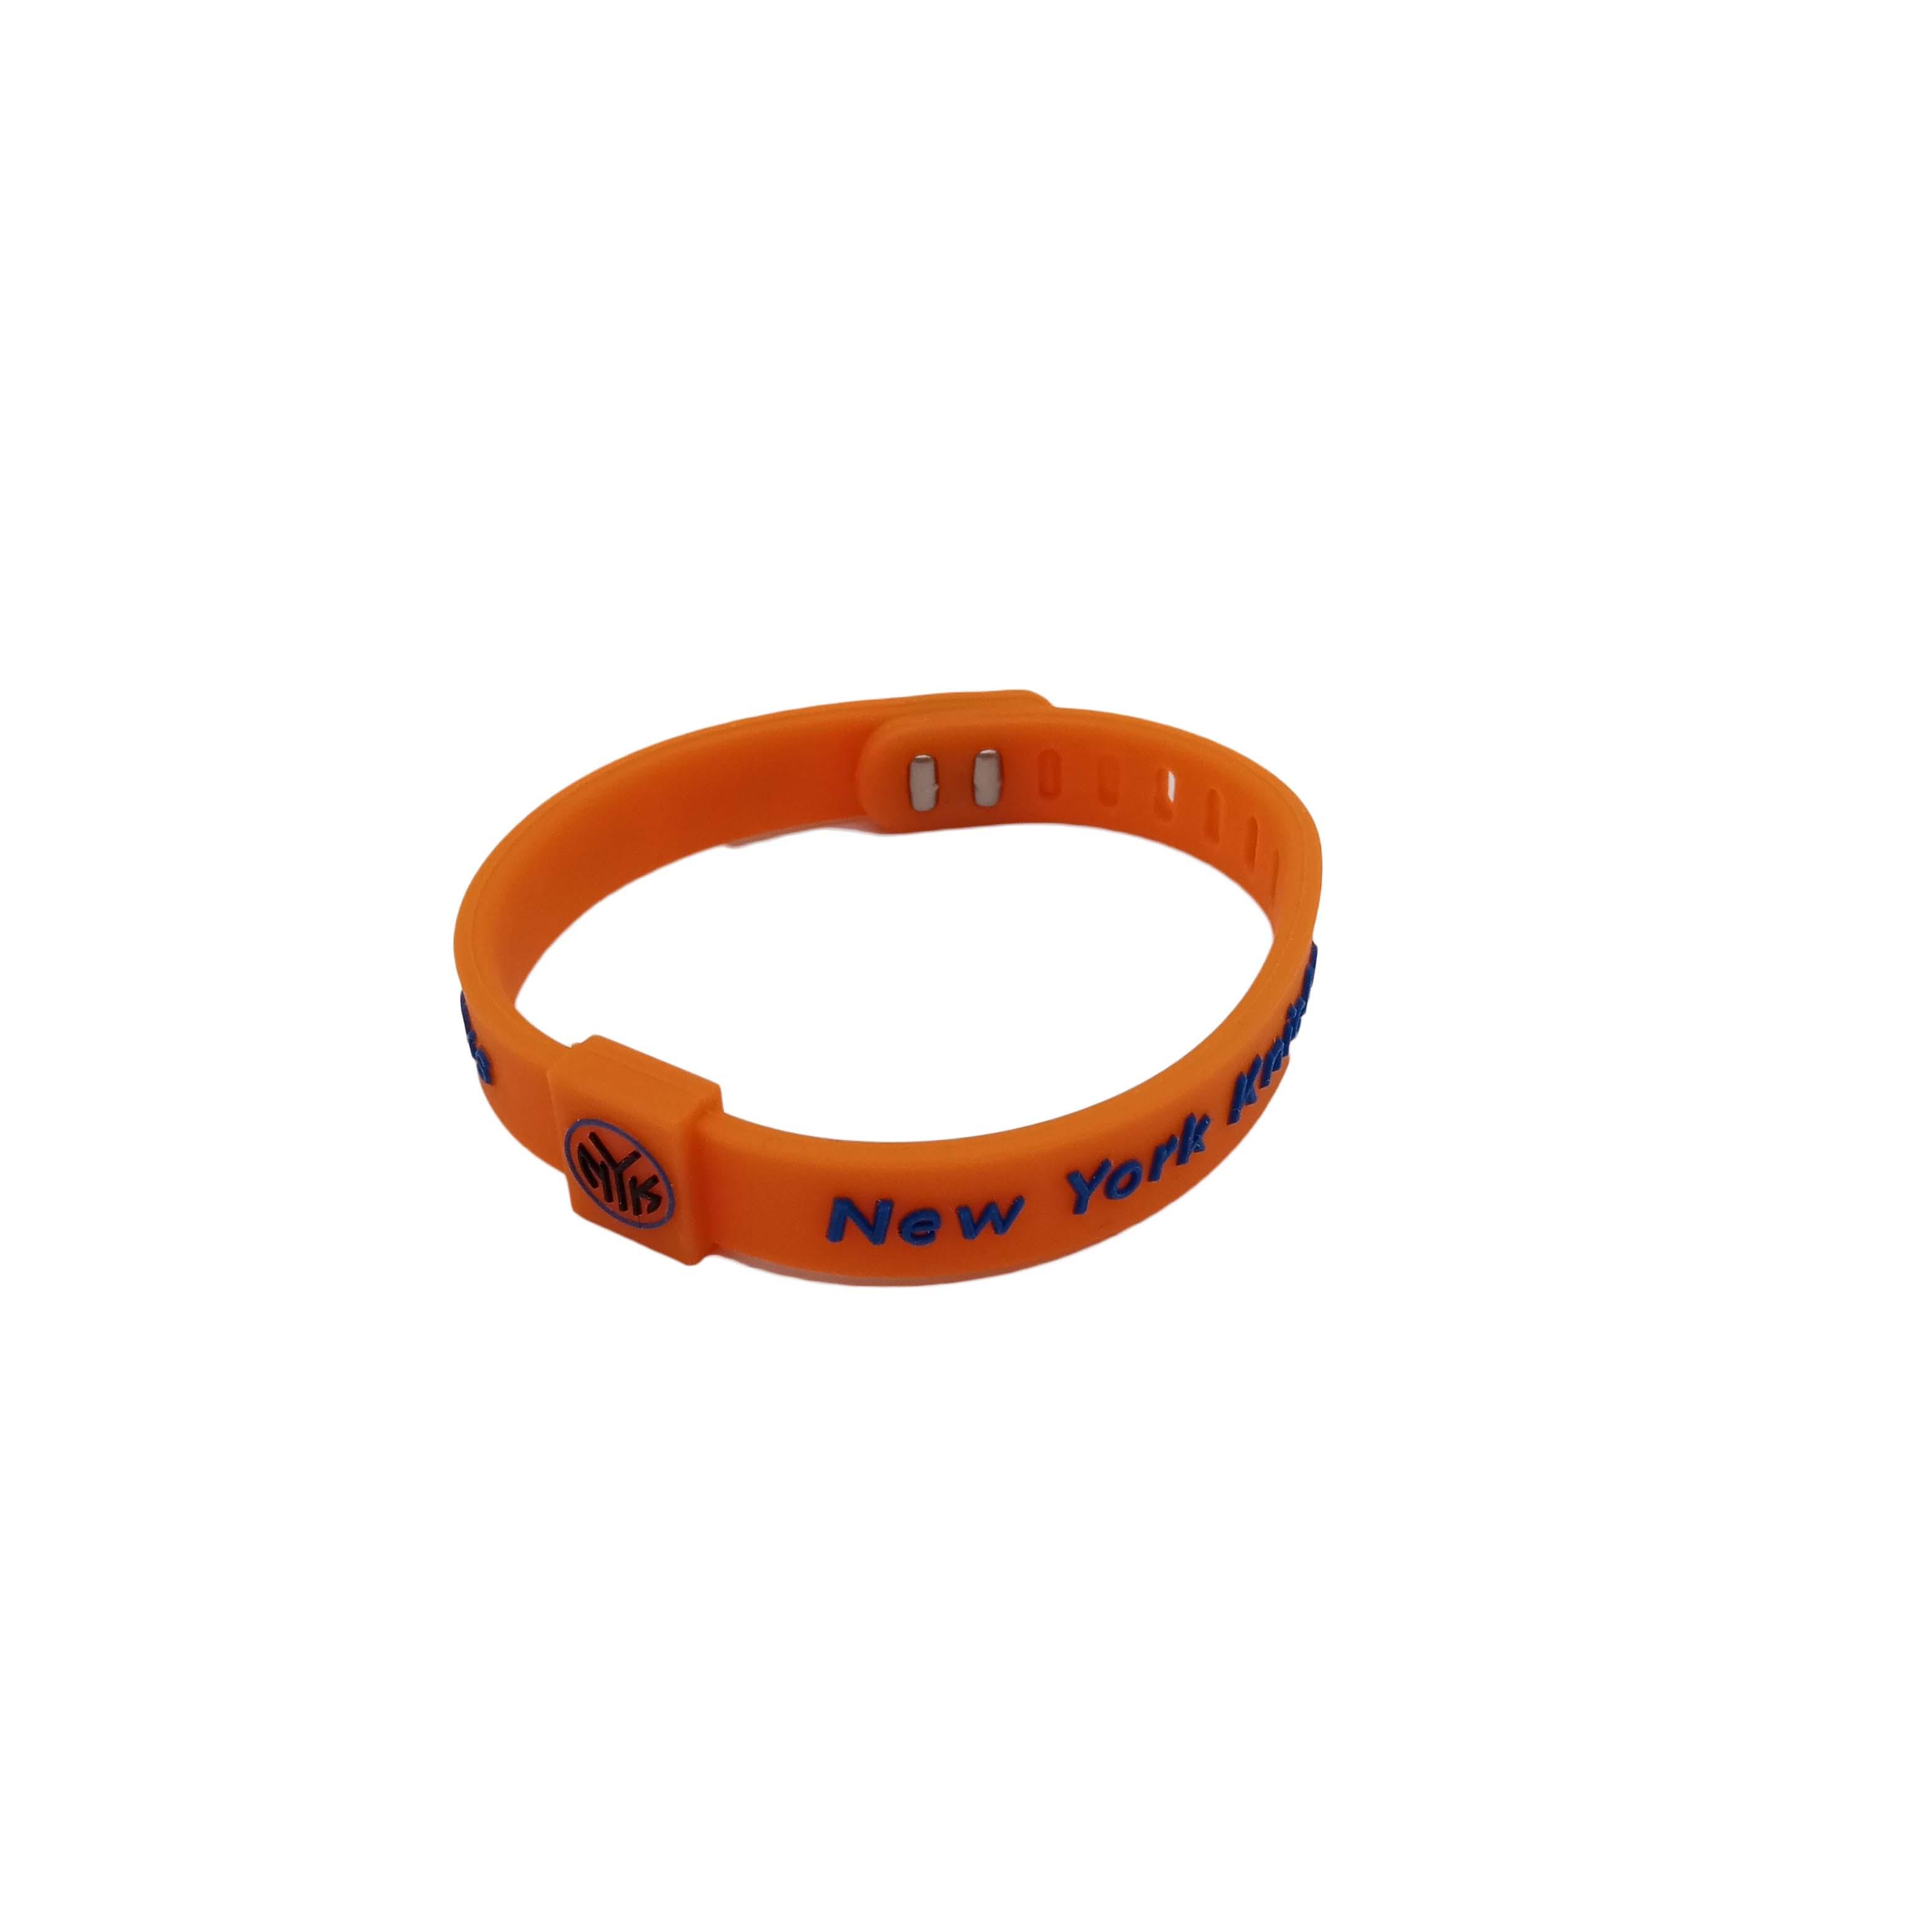 Elastic ID Wristbands Sold in packs of 100